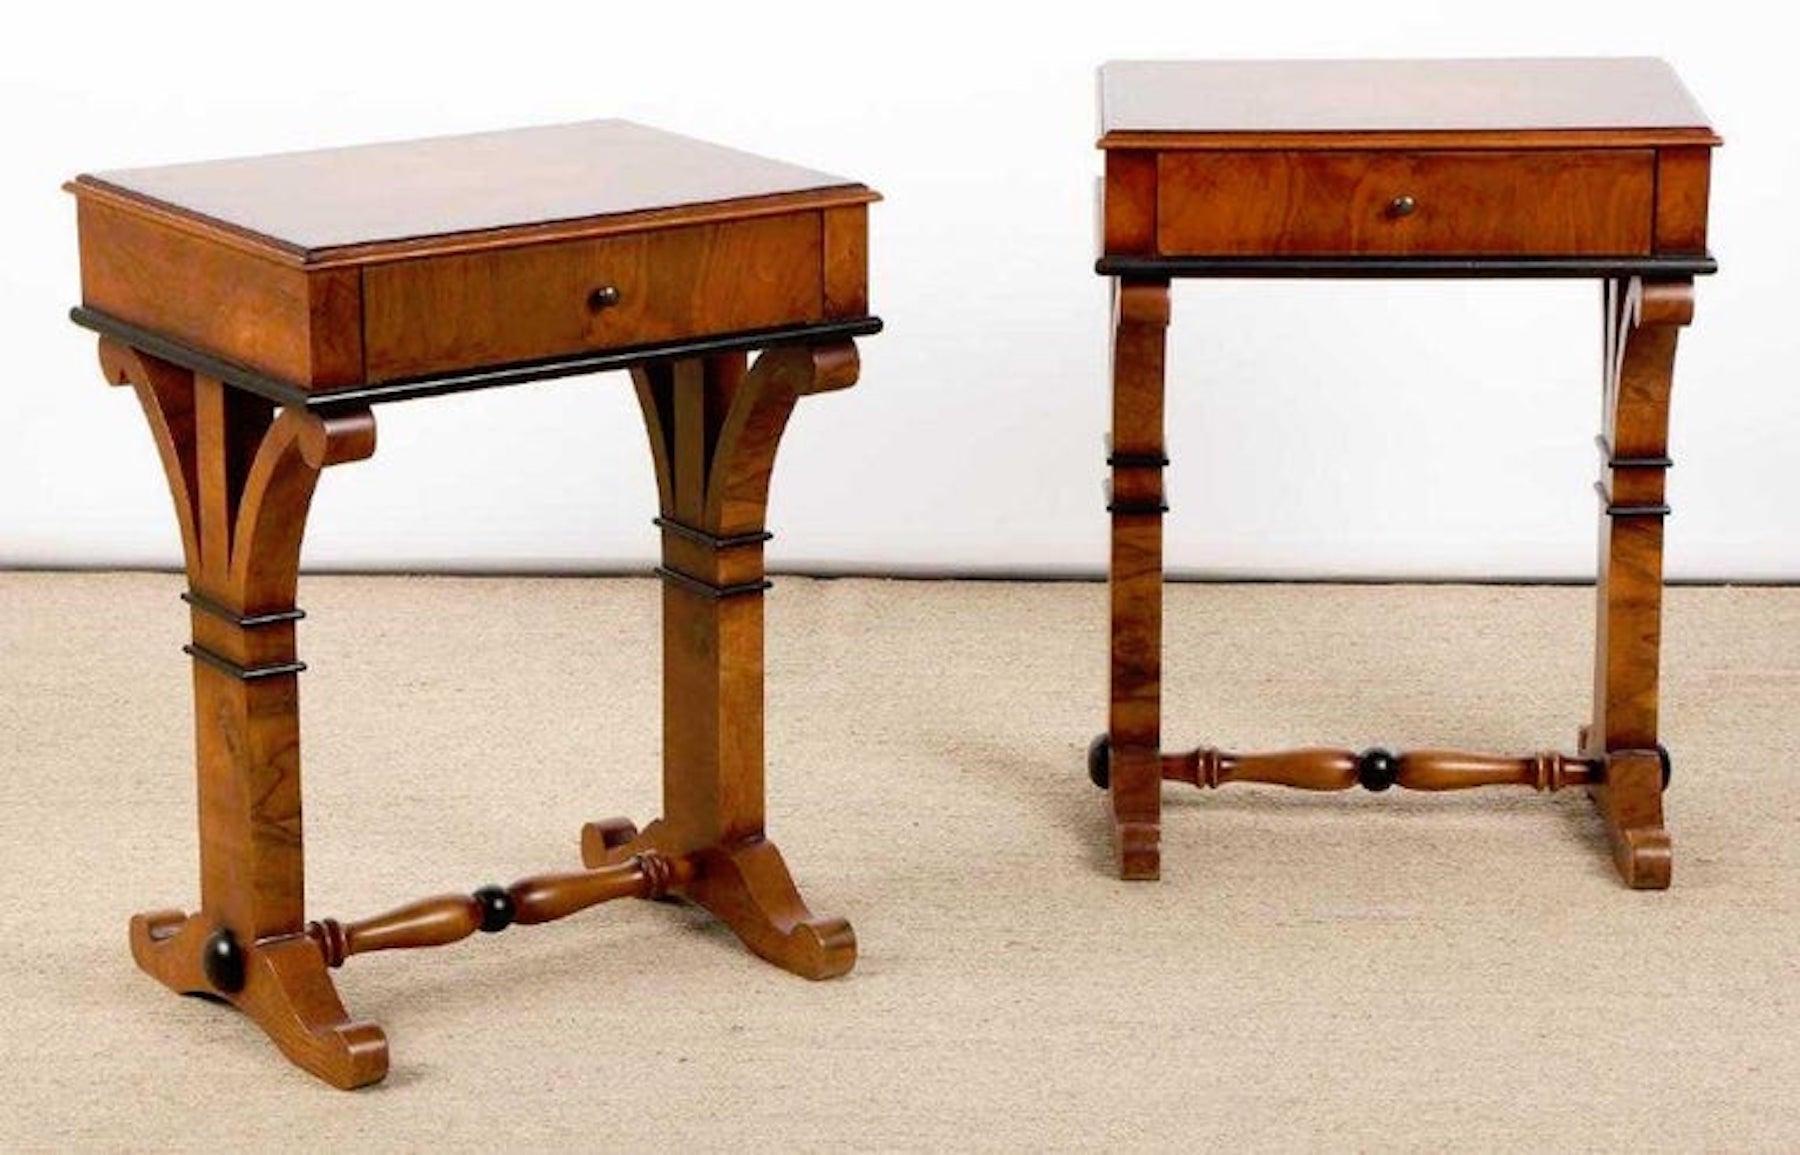 Pair of Biedermeier style burl and ebonized end tables or nightstands, each one fitted with one drawer. Beautiful architectural design of figured burl wood, with ebonized details.

 